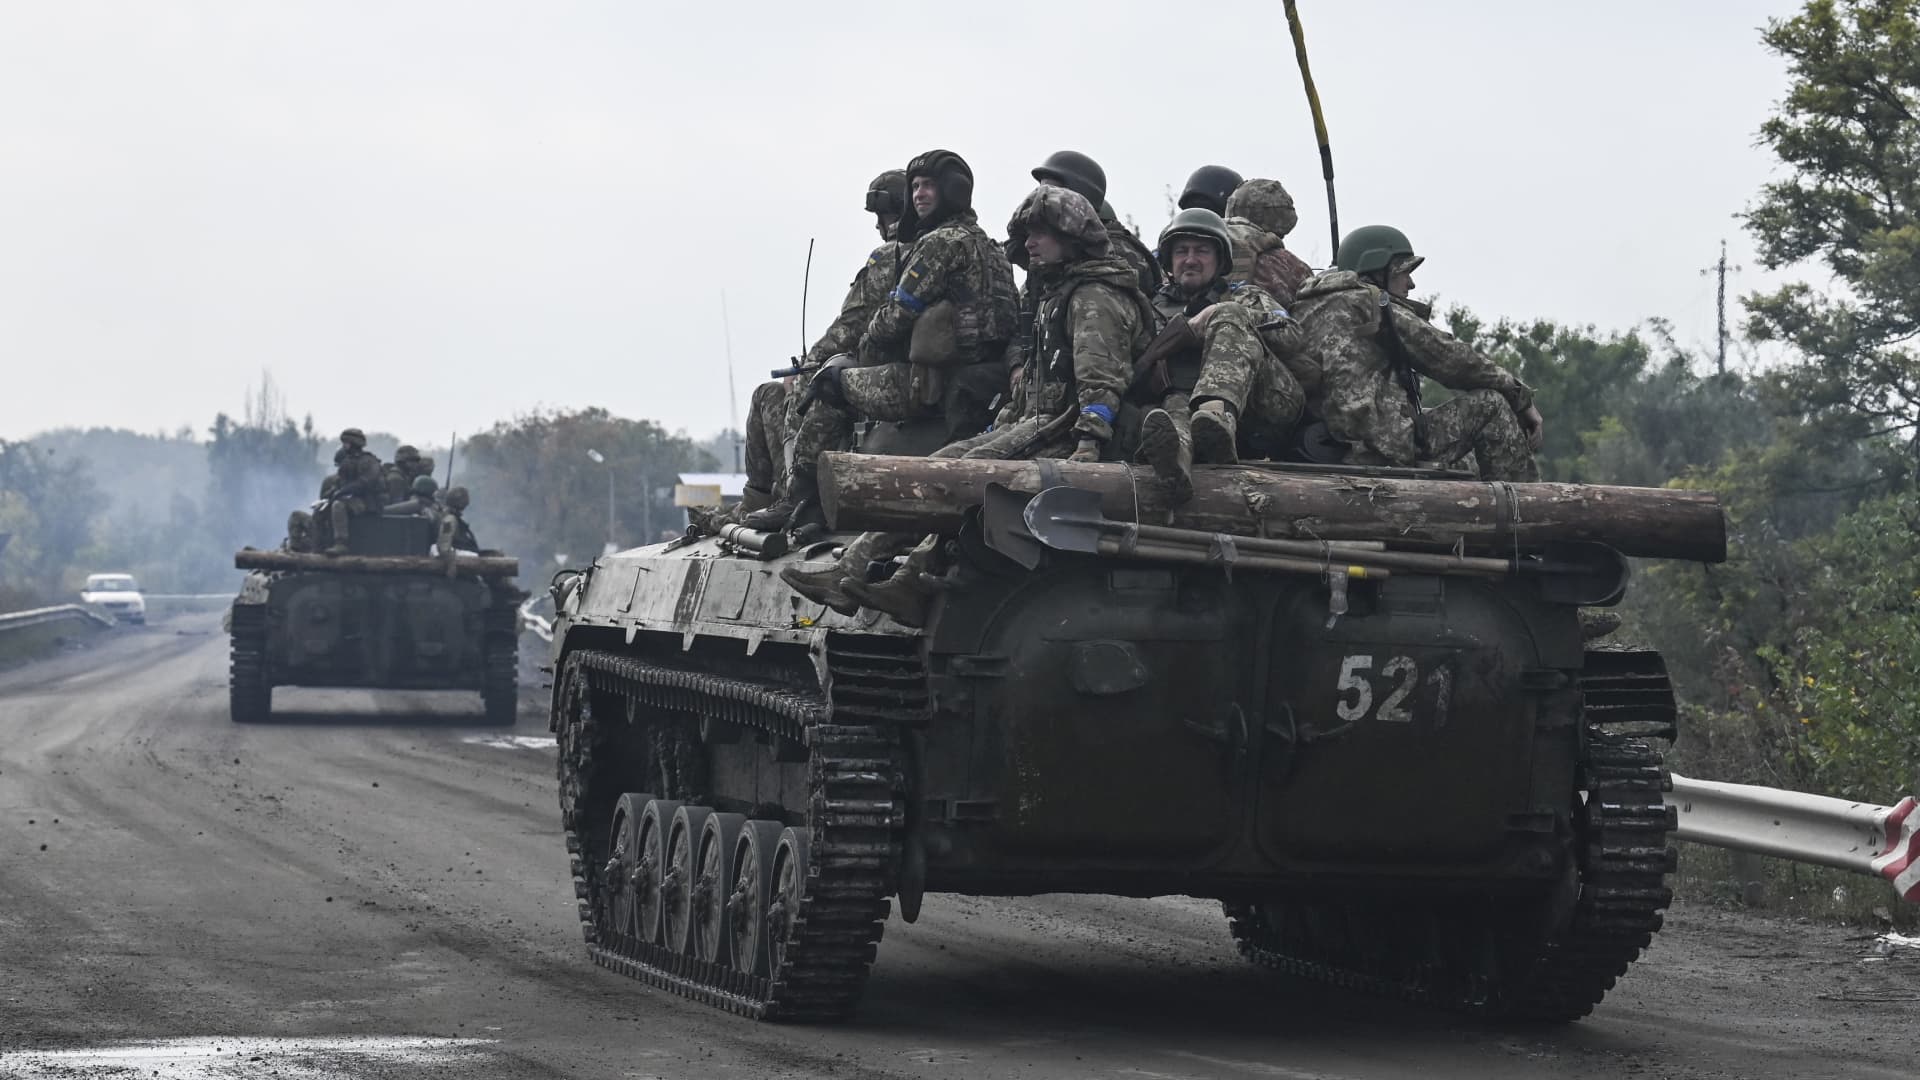 Ukraine allies see risk in Russia’s response to battlefield setbacks – CNBC